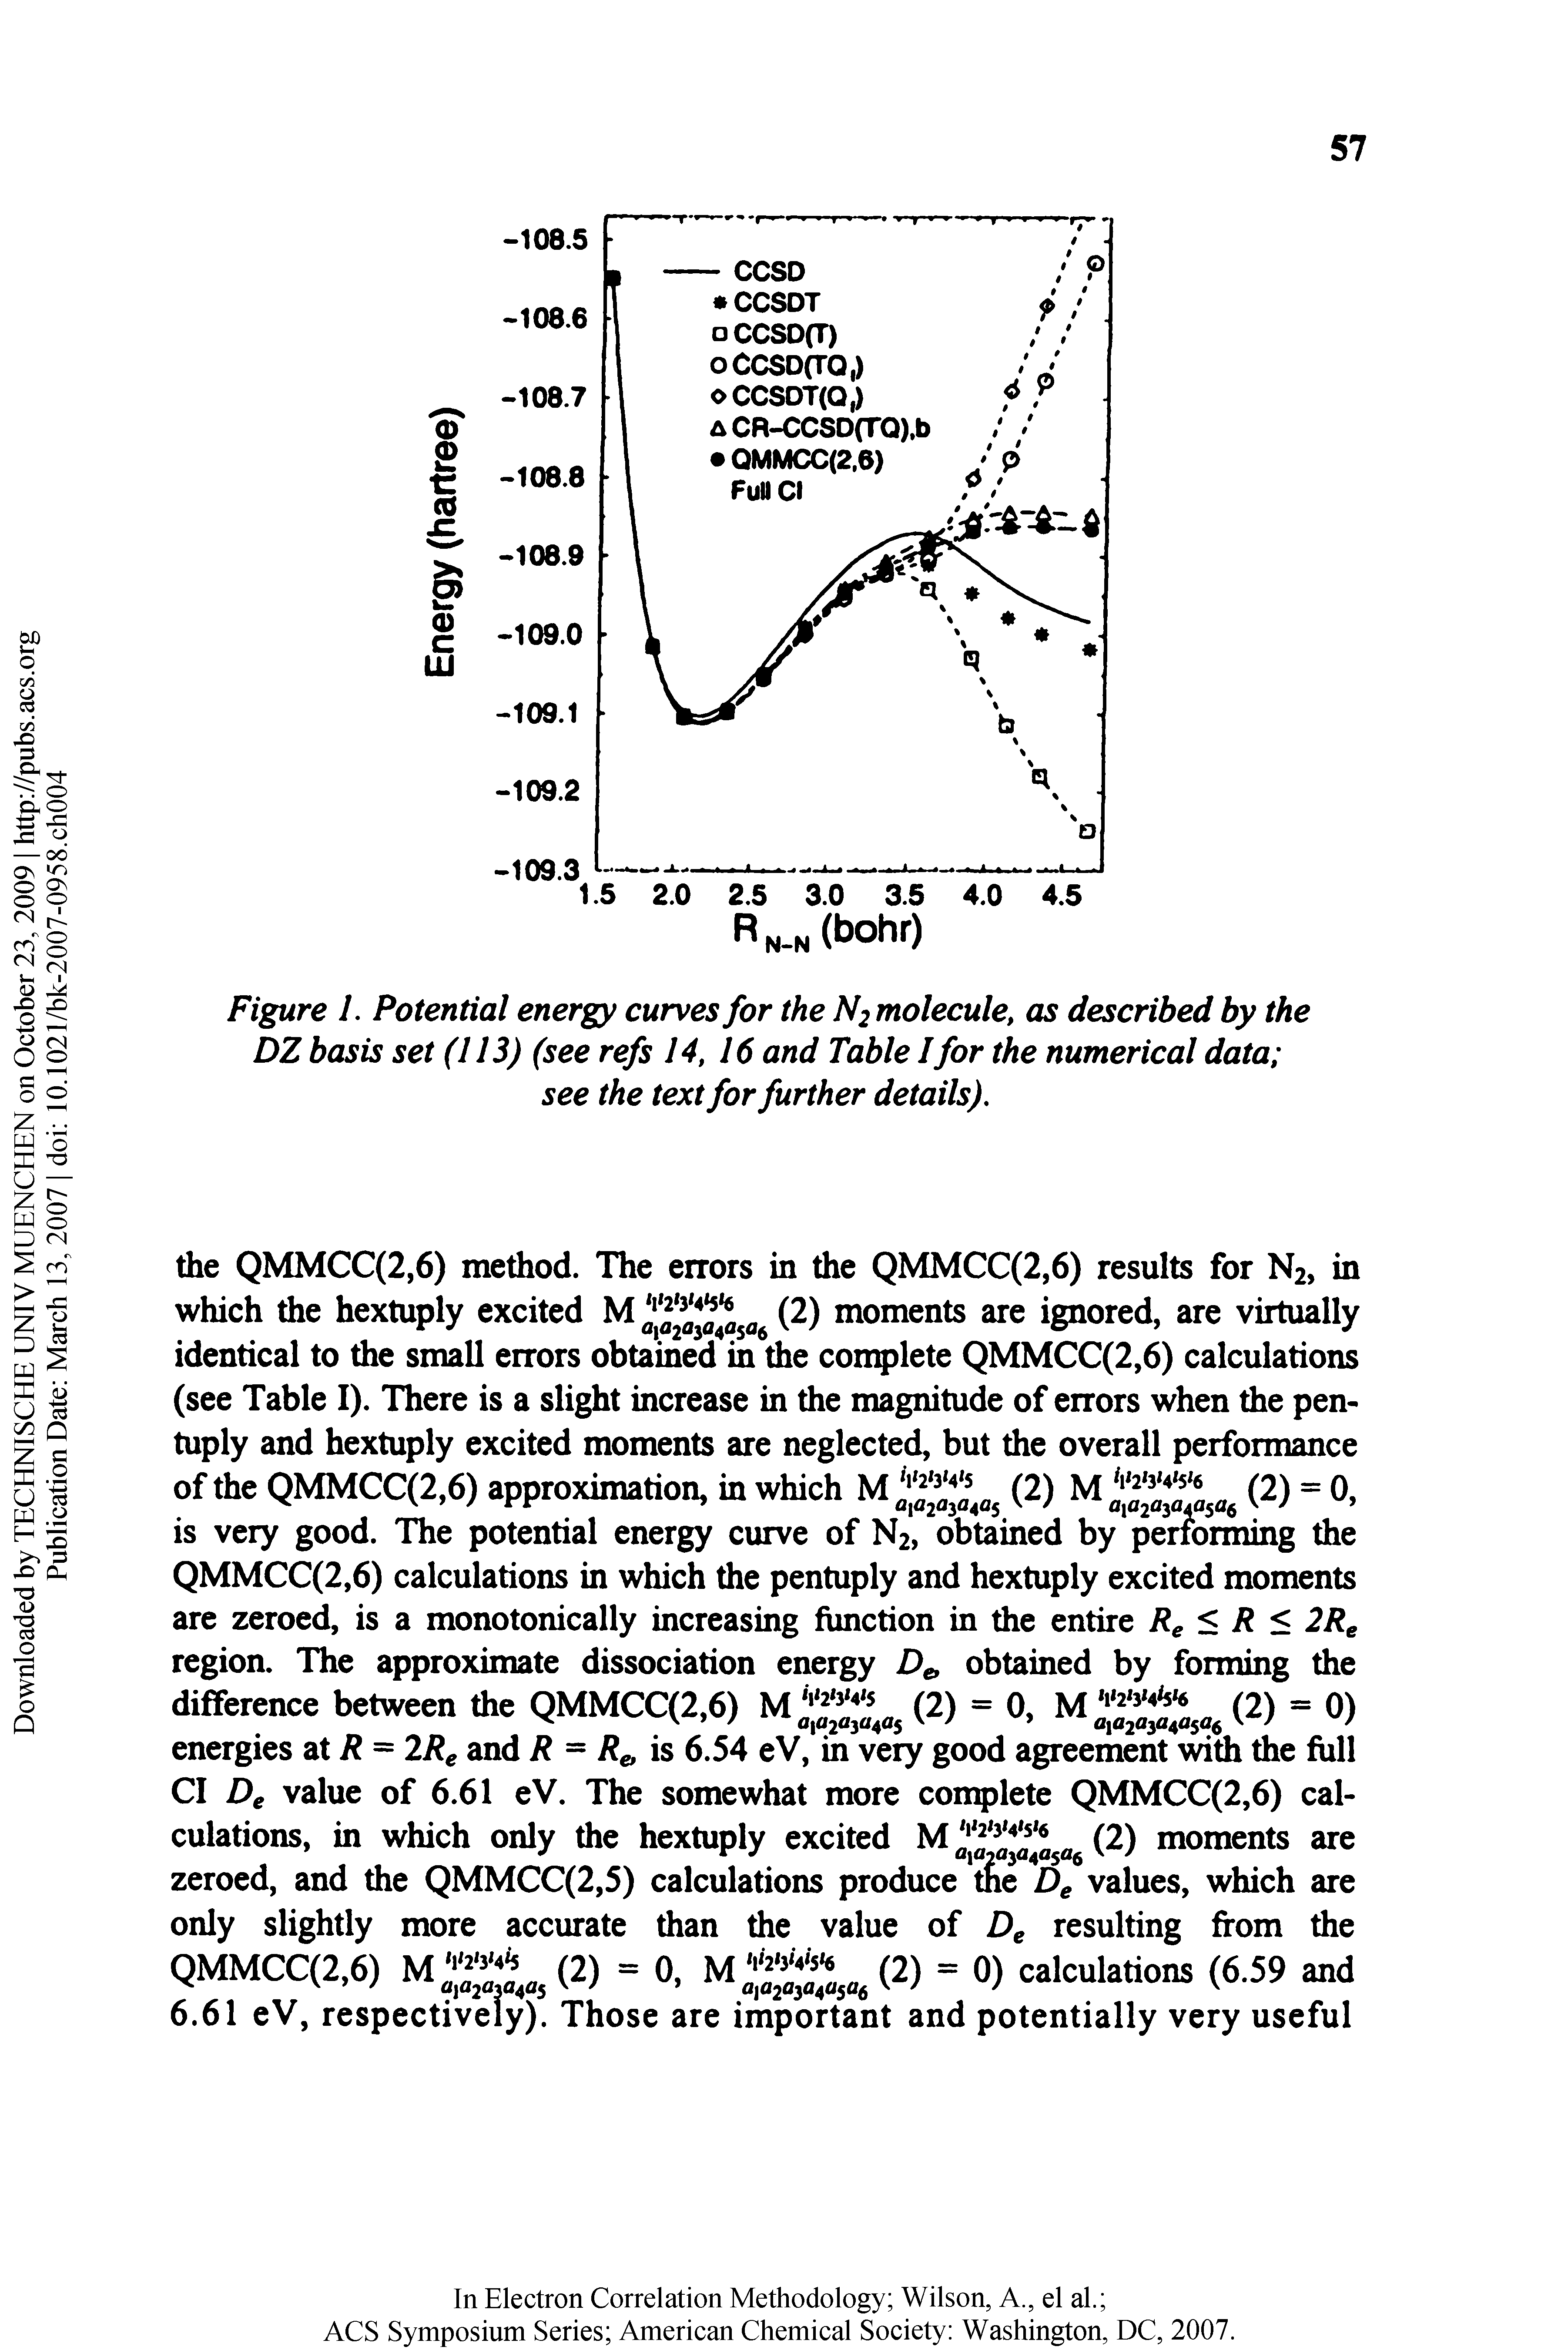 Figure I. Potential energy curves for the N2 molecule, as described by the DZ basis set (113) (see refs 14, 16 and Table I for the numerical data see the text for further details).